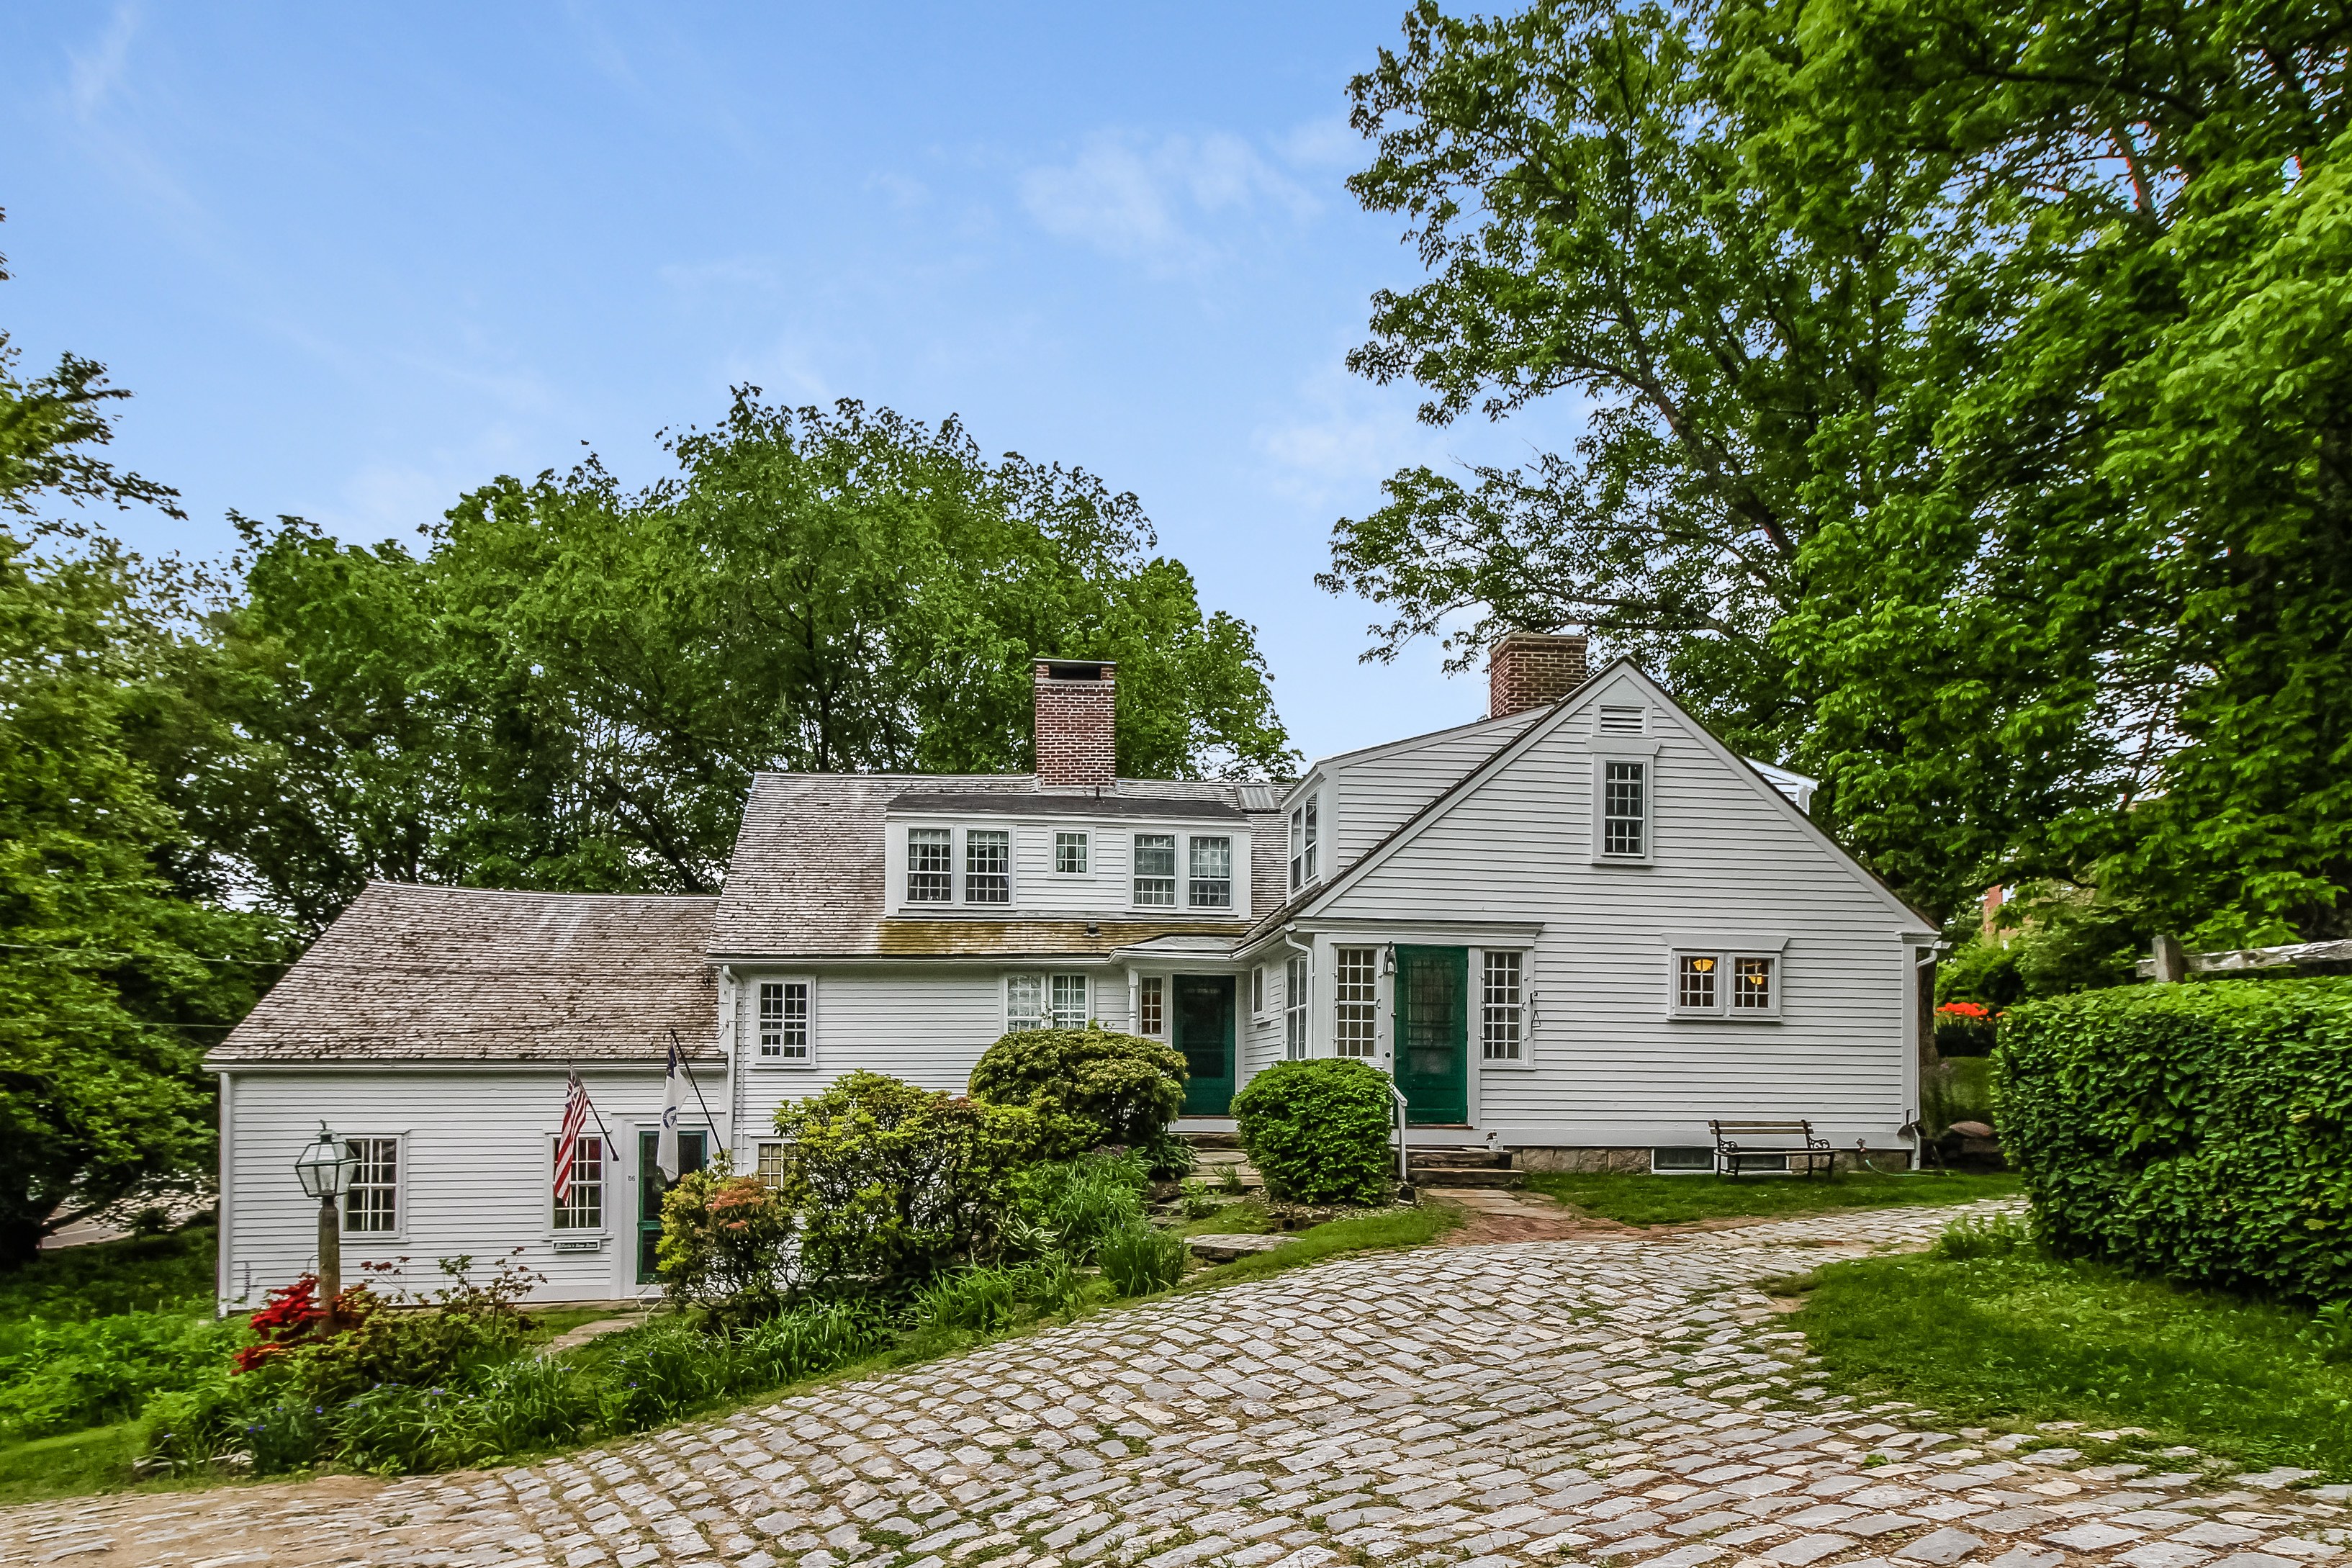 56 Main Street Scituate Ri 02831 Mott Chace Sotheby S